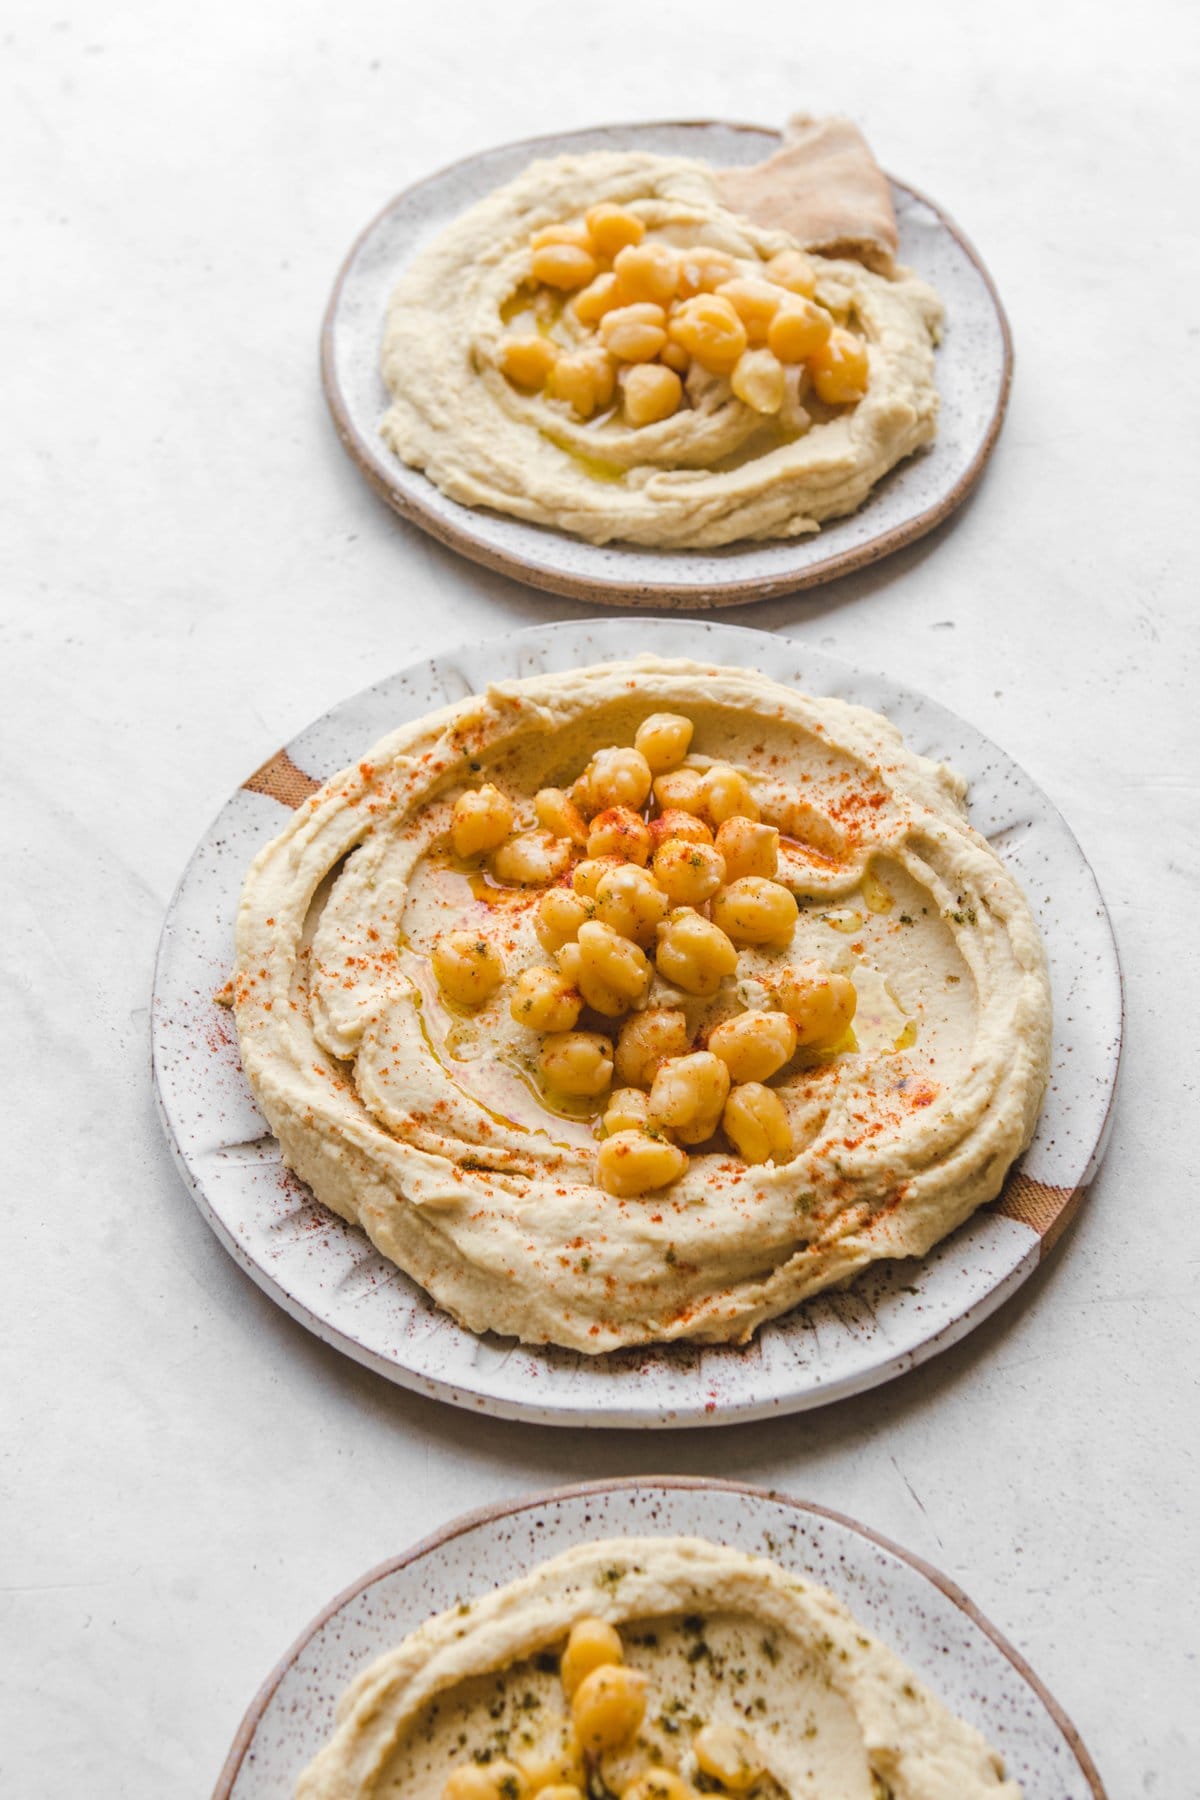 How To Make The Best Hummus Recipe From My Bowl